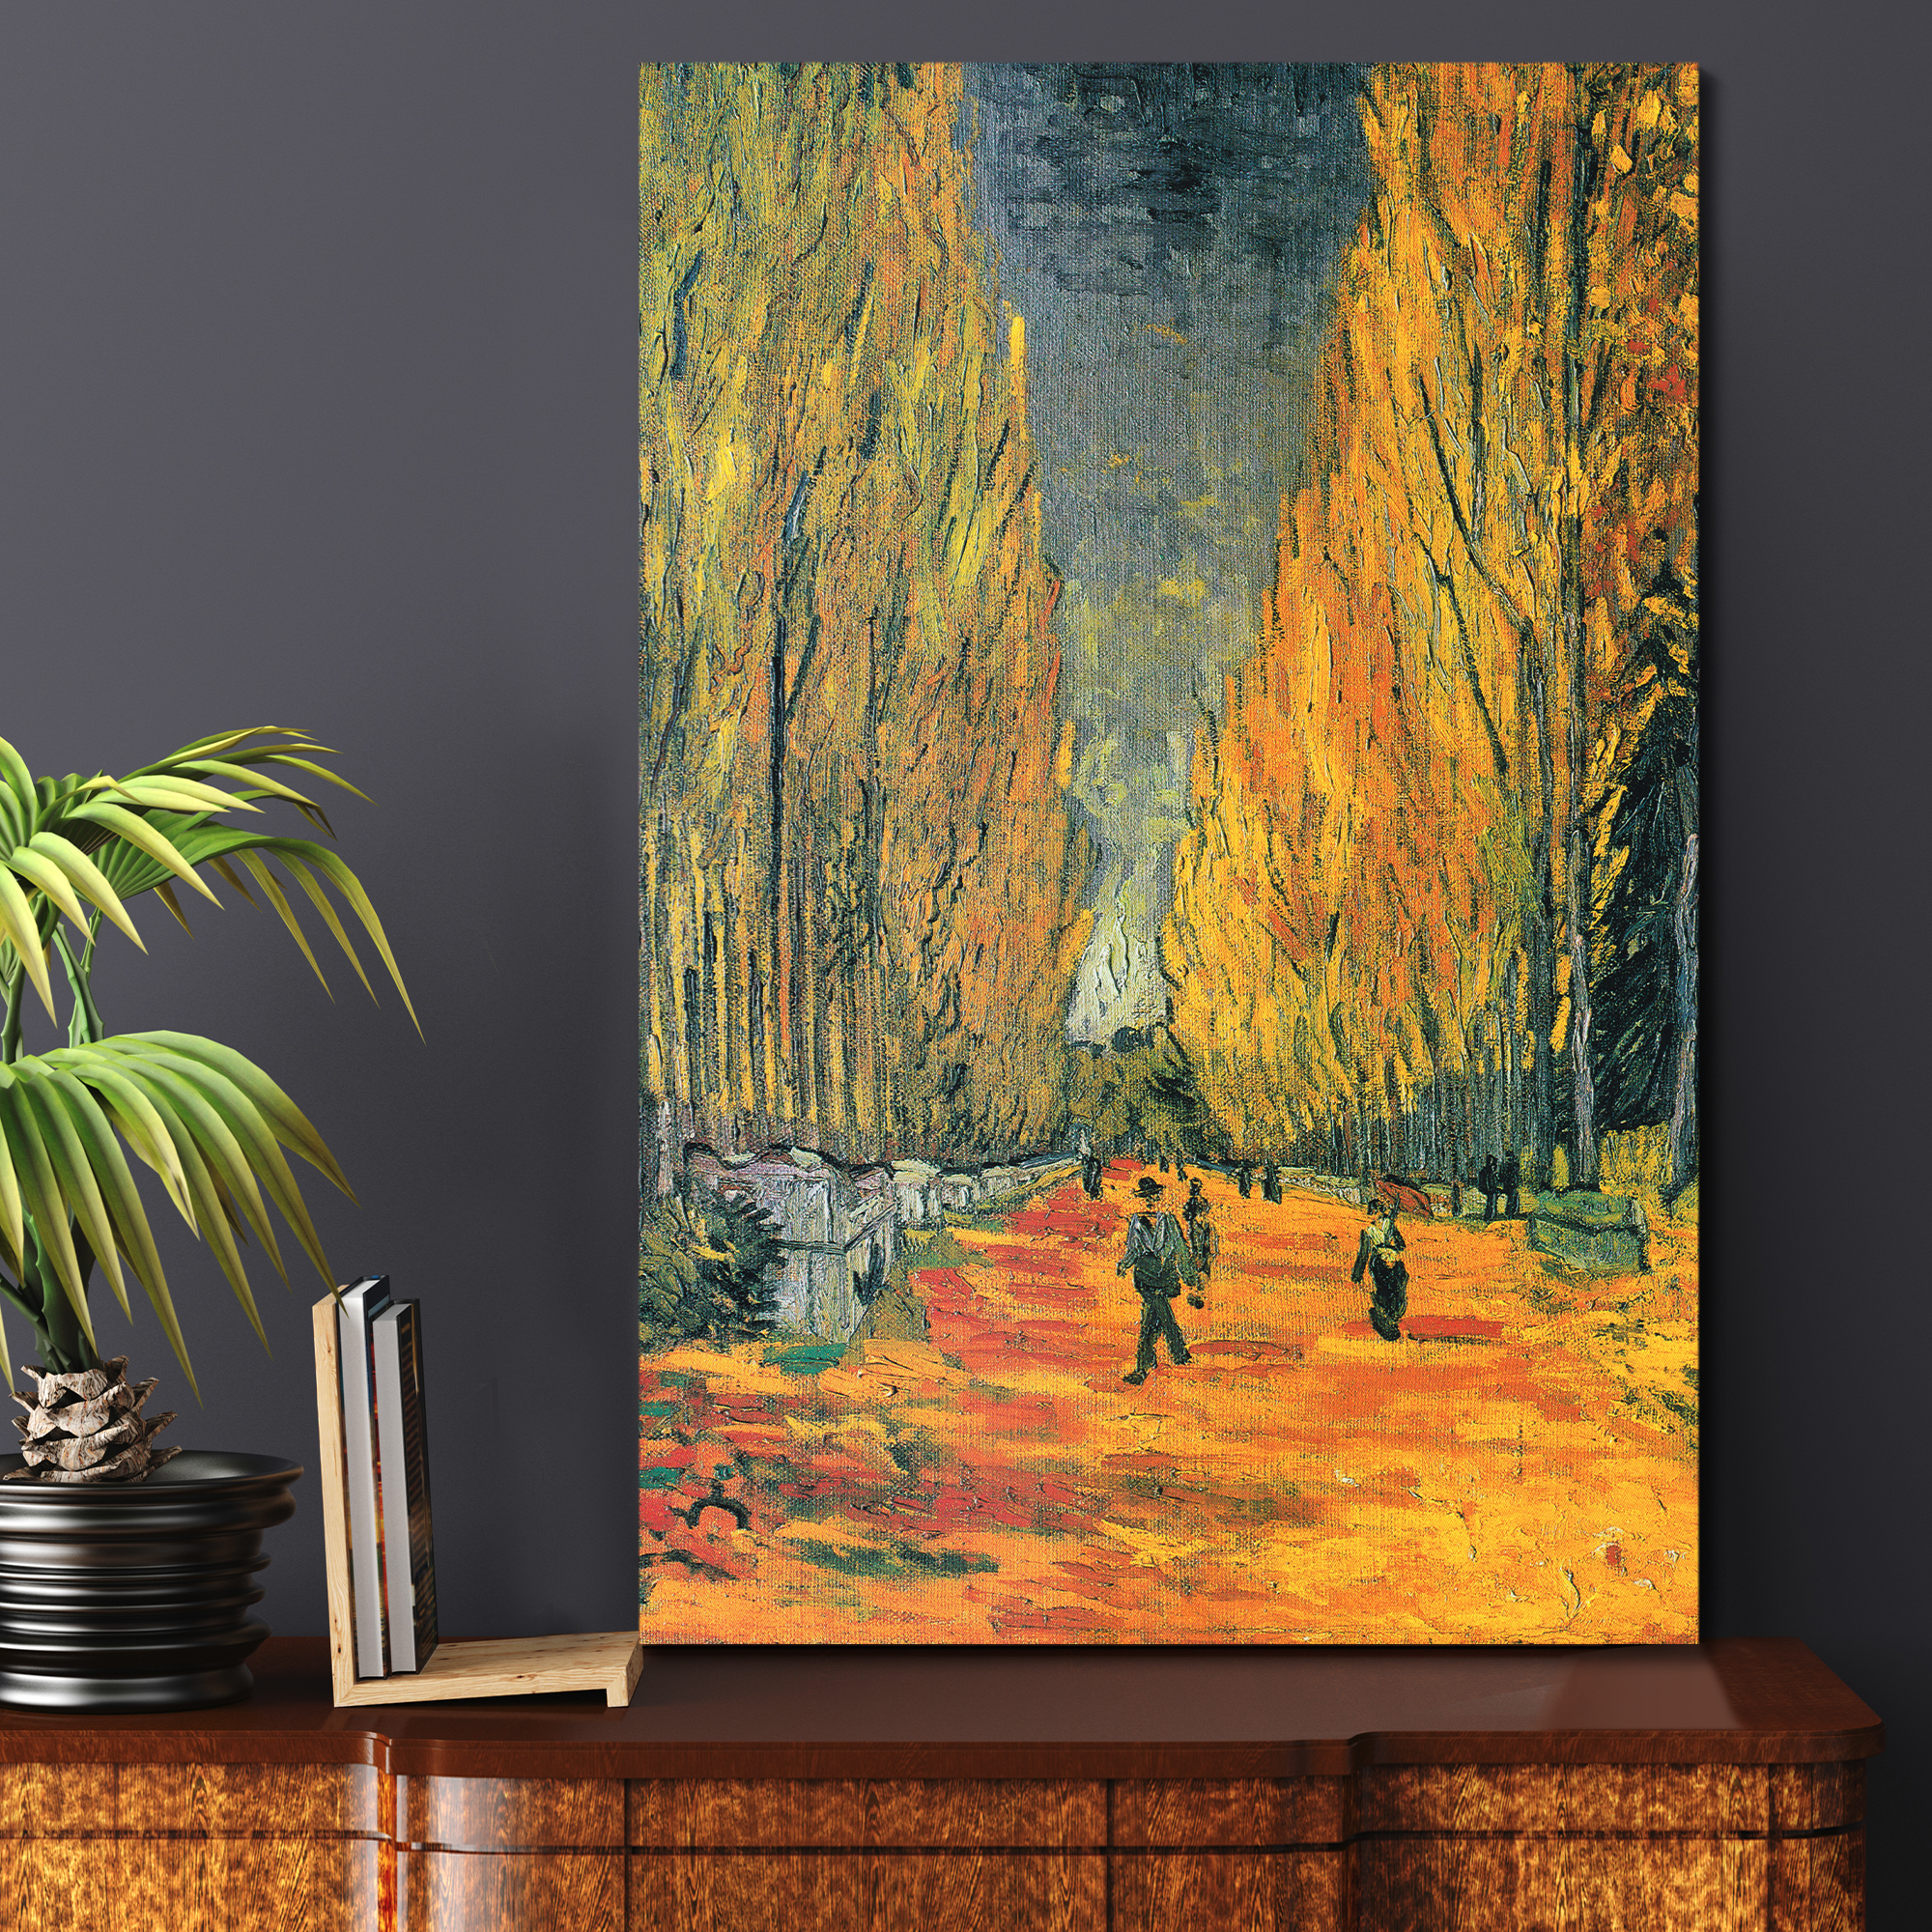 Les Alyscamps by Vincent Van Gogh - Oil Painting Reproduction on Canvas Prints Wall Art, Ready to Hang - 24